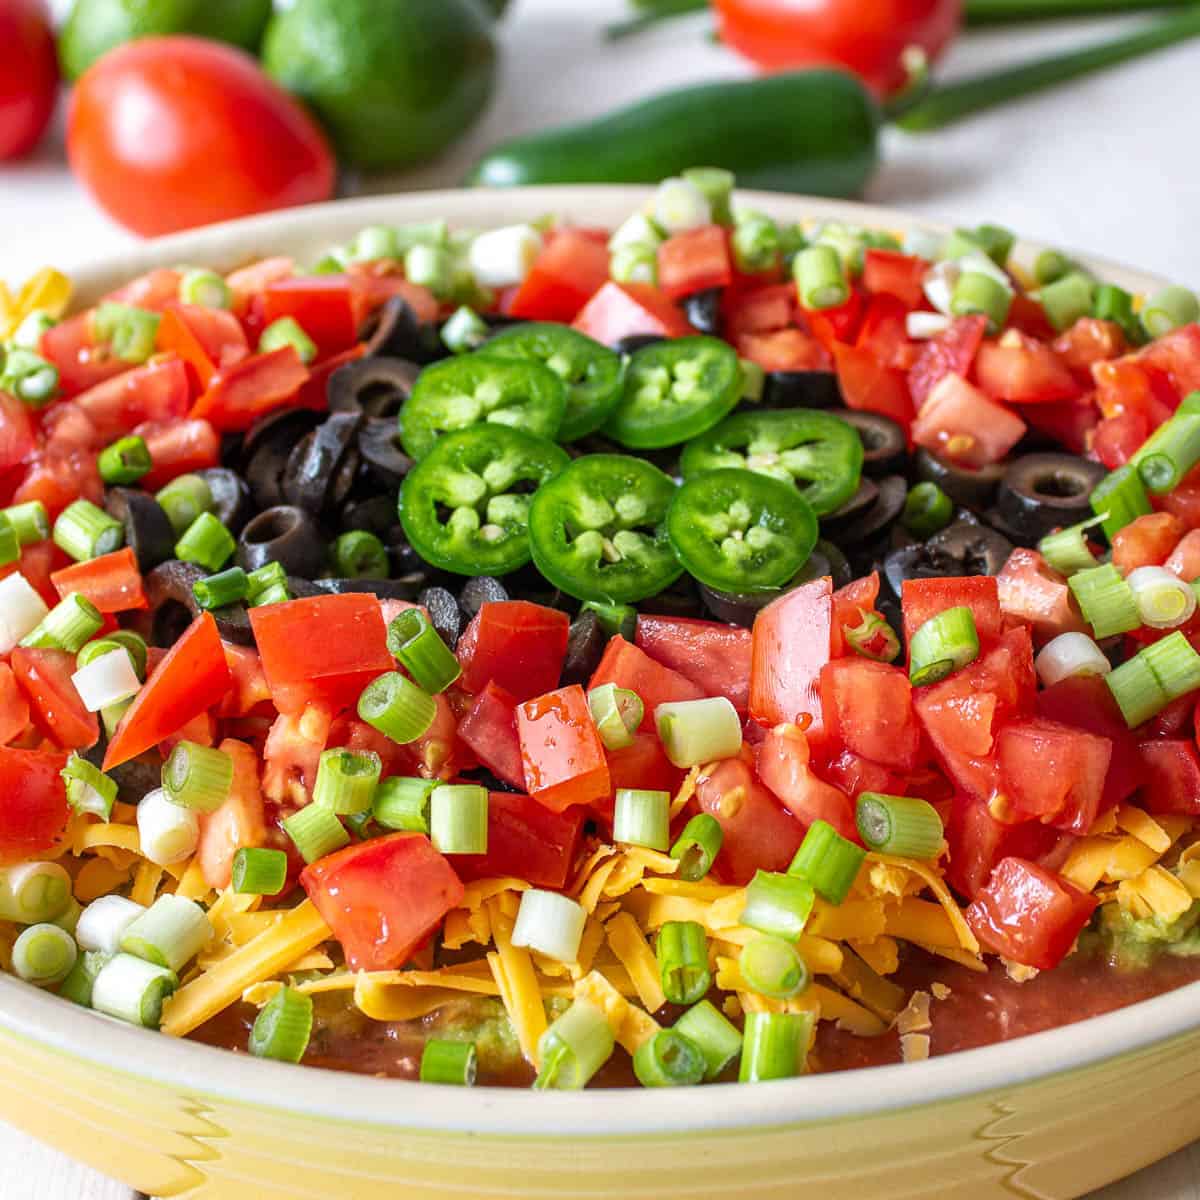 A layered dip topped with chopped tomatoes, olives and sliced jalapenos.